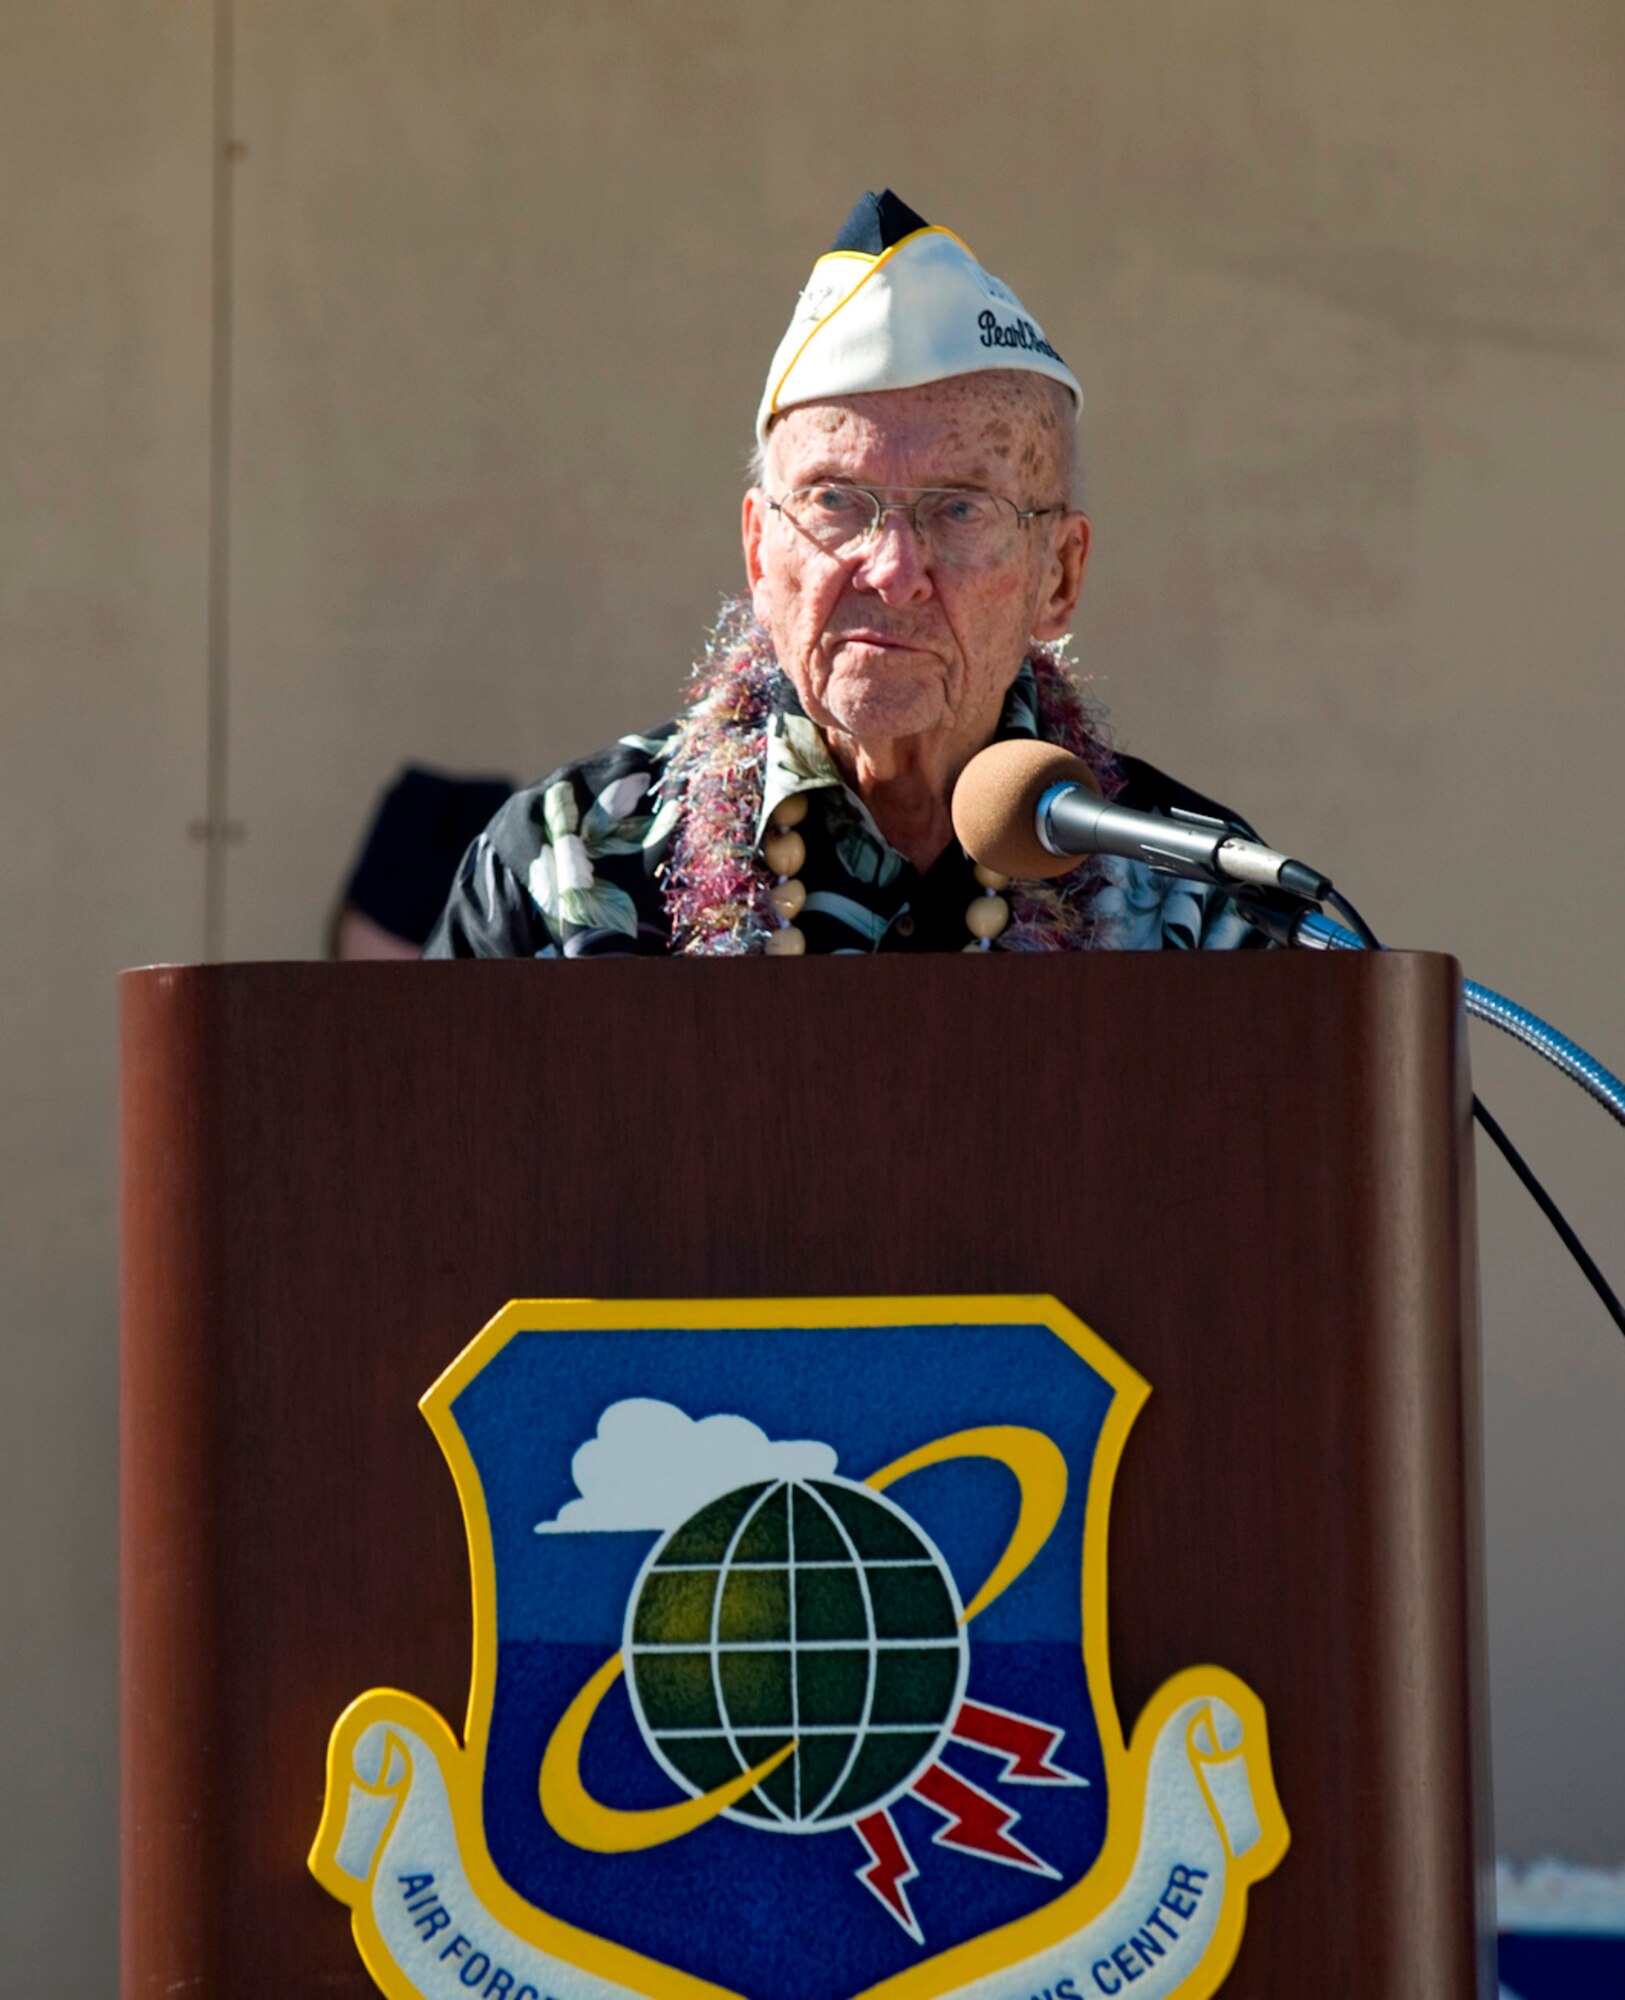 Retired U.S. Navy Capt. Richard P. Jeffrey gives the keynote speech during the Pearl Harbor Day Memorial Ceremony Dec. 7 at Patrick Air Force Base. The Air Force Technical Applications Center hosted the ceremony for the 17th consecutive year, paying tribute to Captain Jeffrey and three other U.S. servicemen and several surviving spouses who were all impacted by the 1941 Japanese attacks on Pearl Harbor. (U.S. Air Force photo/Julie Dayringer)